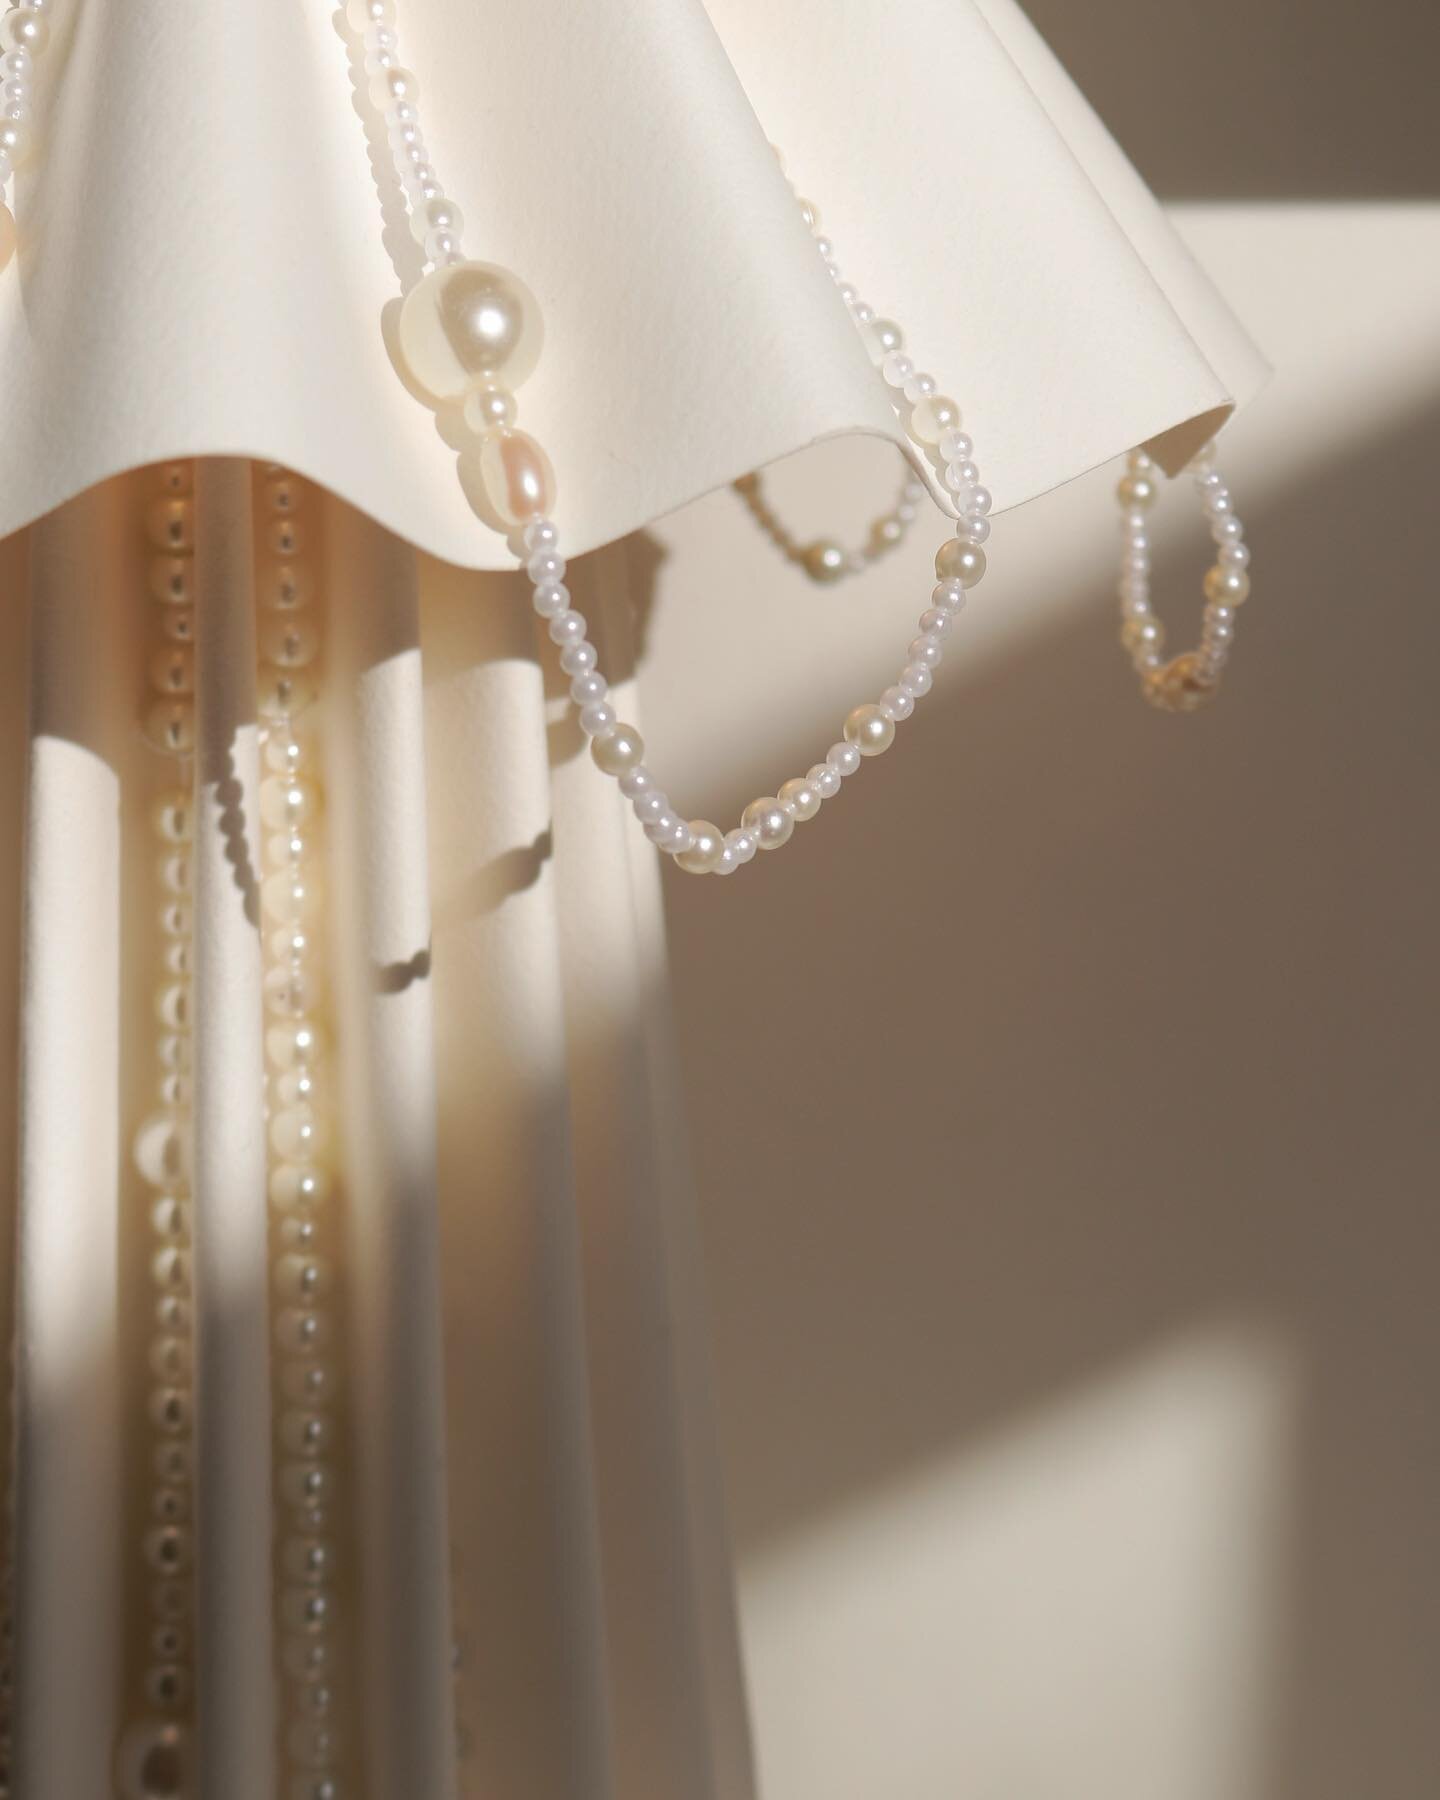 Tomorrow at 6pm we are launching our ultra luxurious upcycled collaboration featuring 726 inches of discarded pearl jewelry hand-sewn onto three one-of-a-kind lamps. 

The pearls get to live a glorious second life on lamps inspired by the natural for